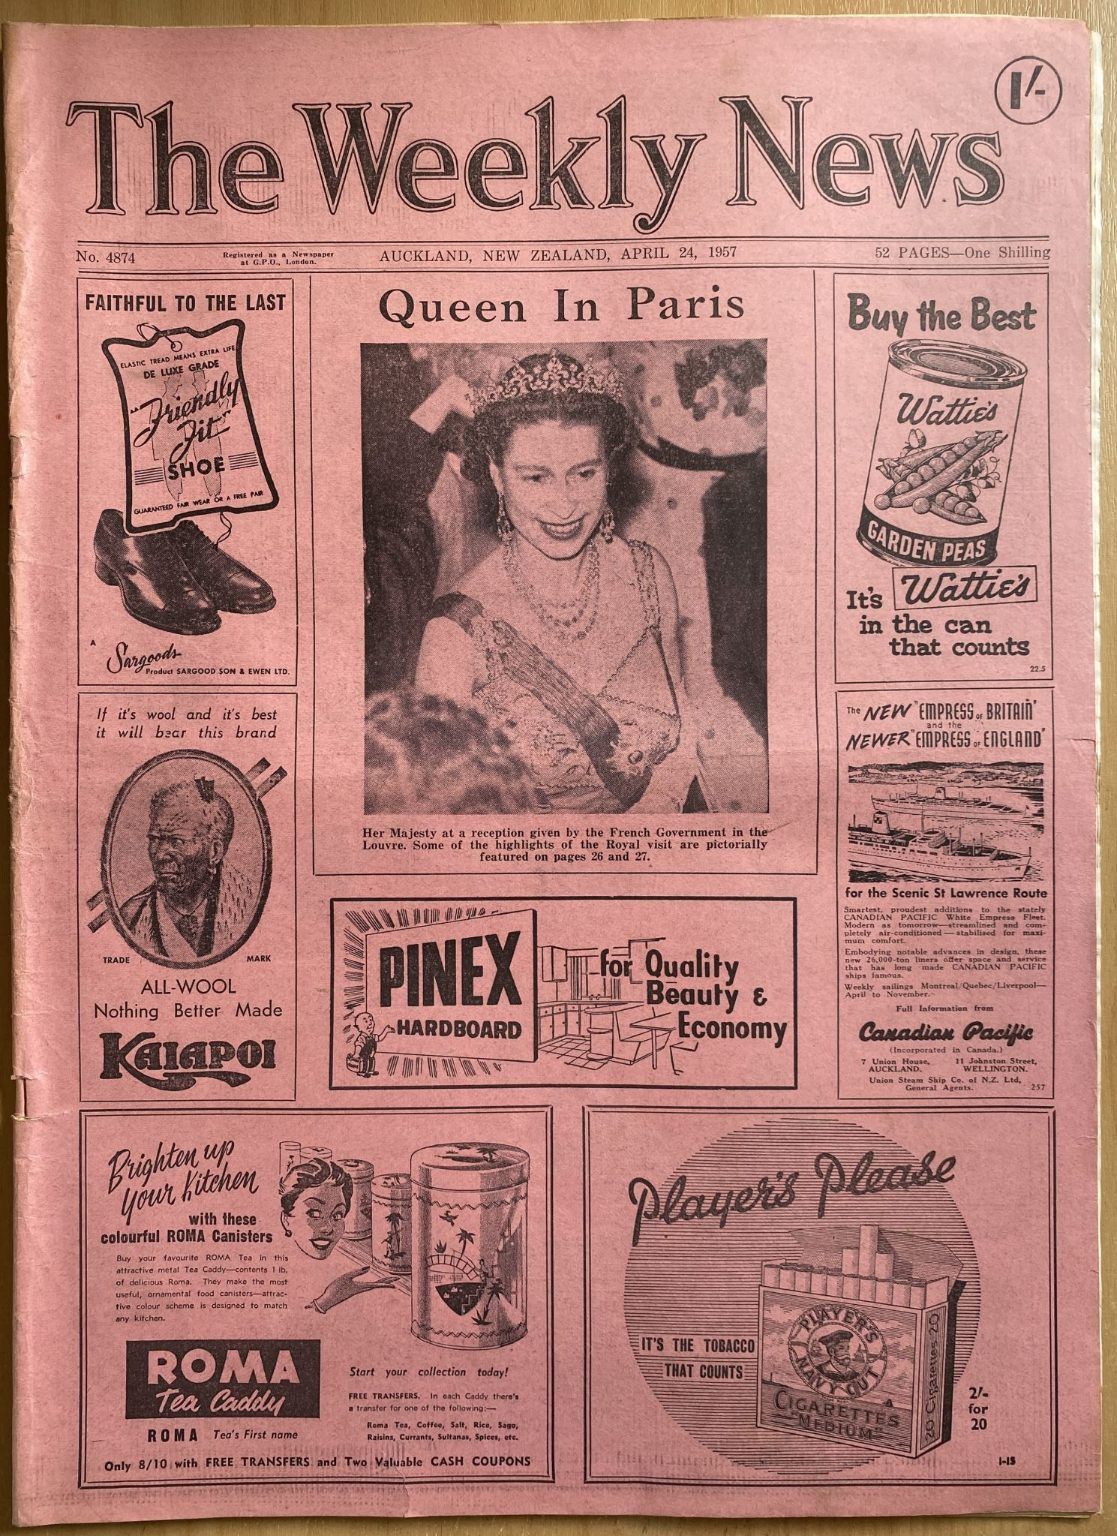 OLD NEWSPAPER: The Weekly News, No. 4874, 24 April 1957